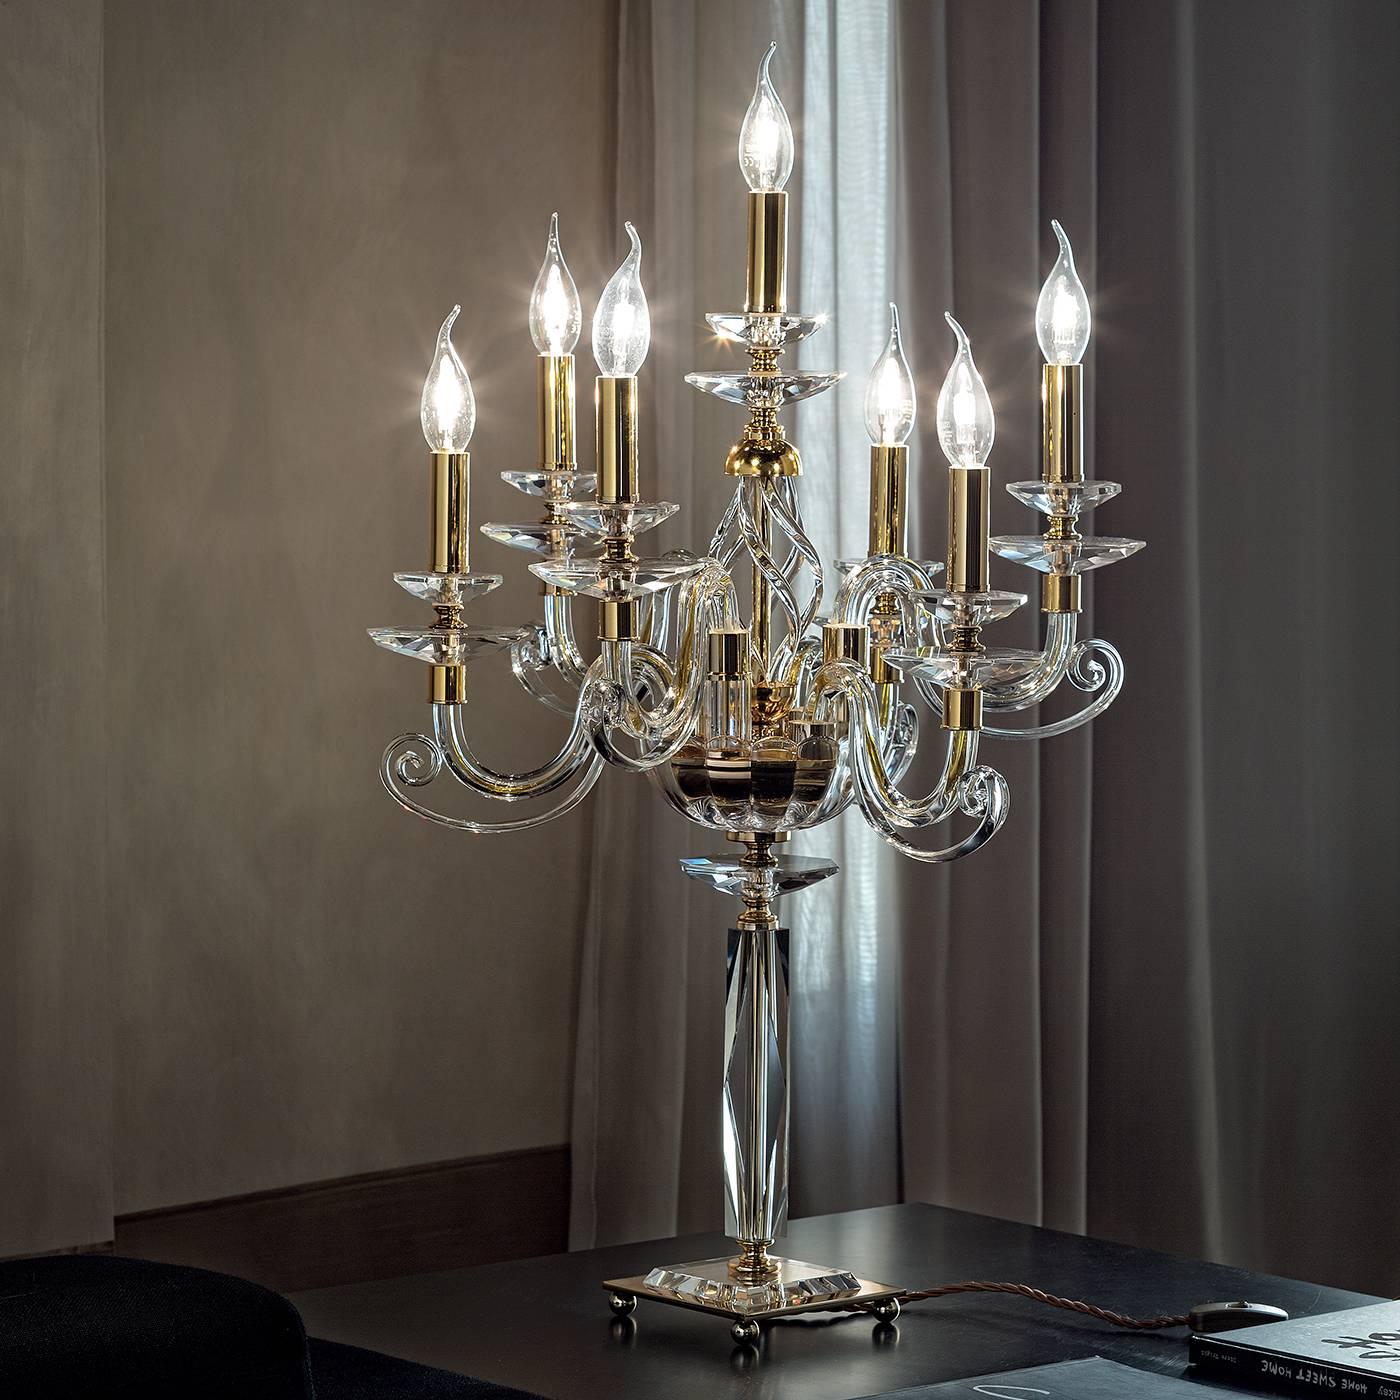 This elegant, seven-branched candelabra is part of the Alicante collection which features exquisite lighting pieces made of clear glass with gold accents decorated with Swarovski crystal. A sophisticated piece of formal decor, it is a striking